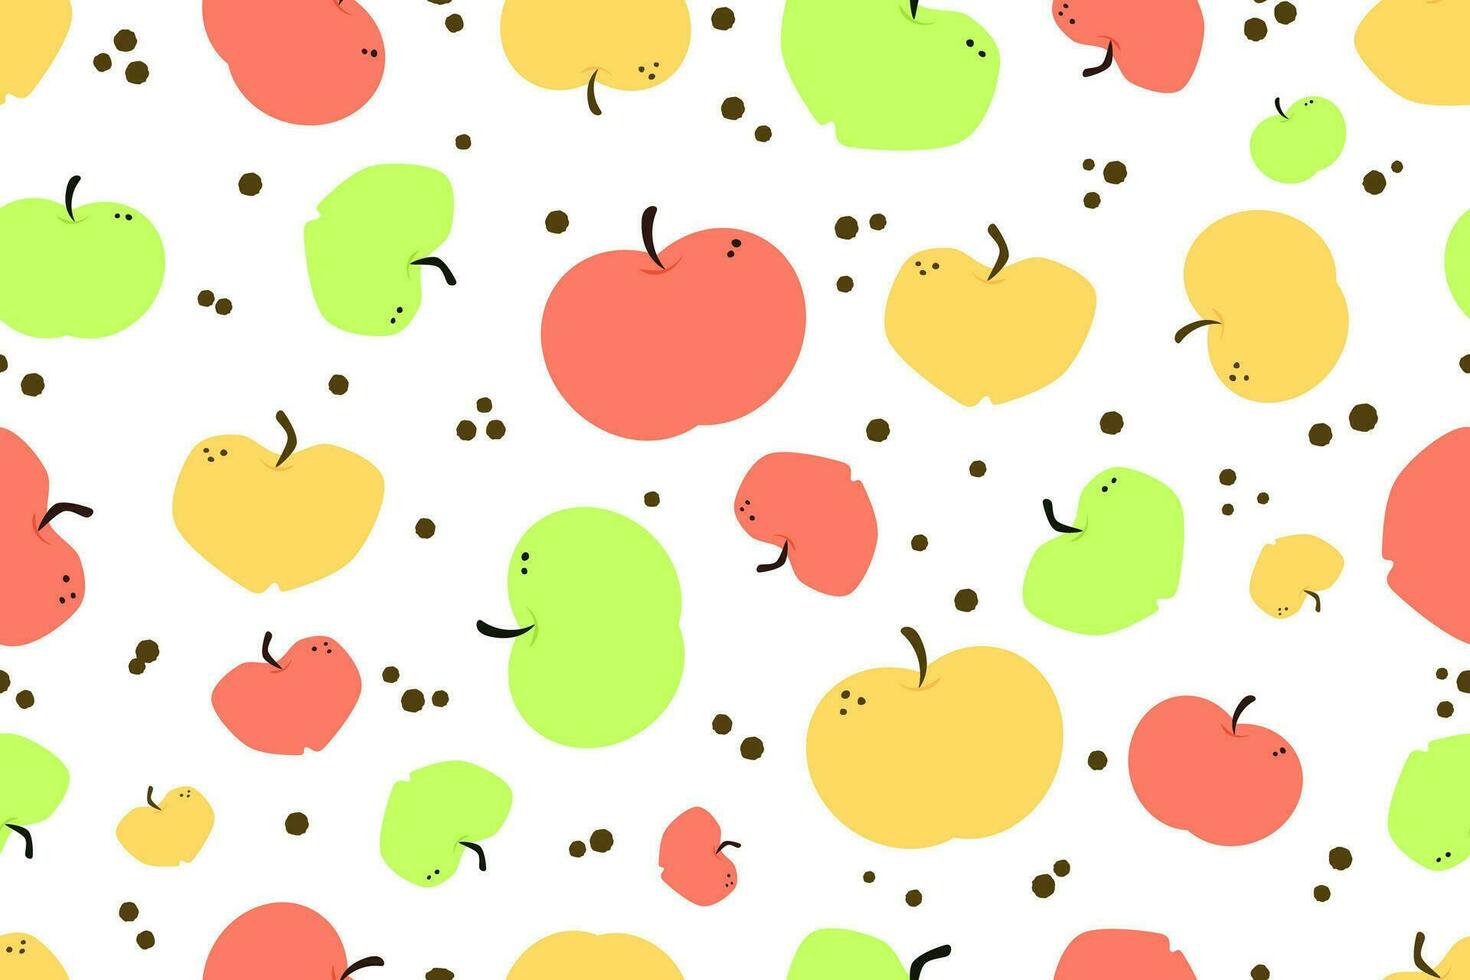 Hand darwn vector illustration of colorful apple seamless pattern